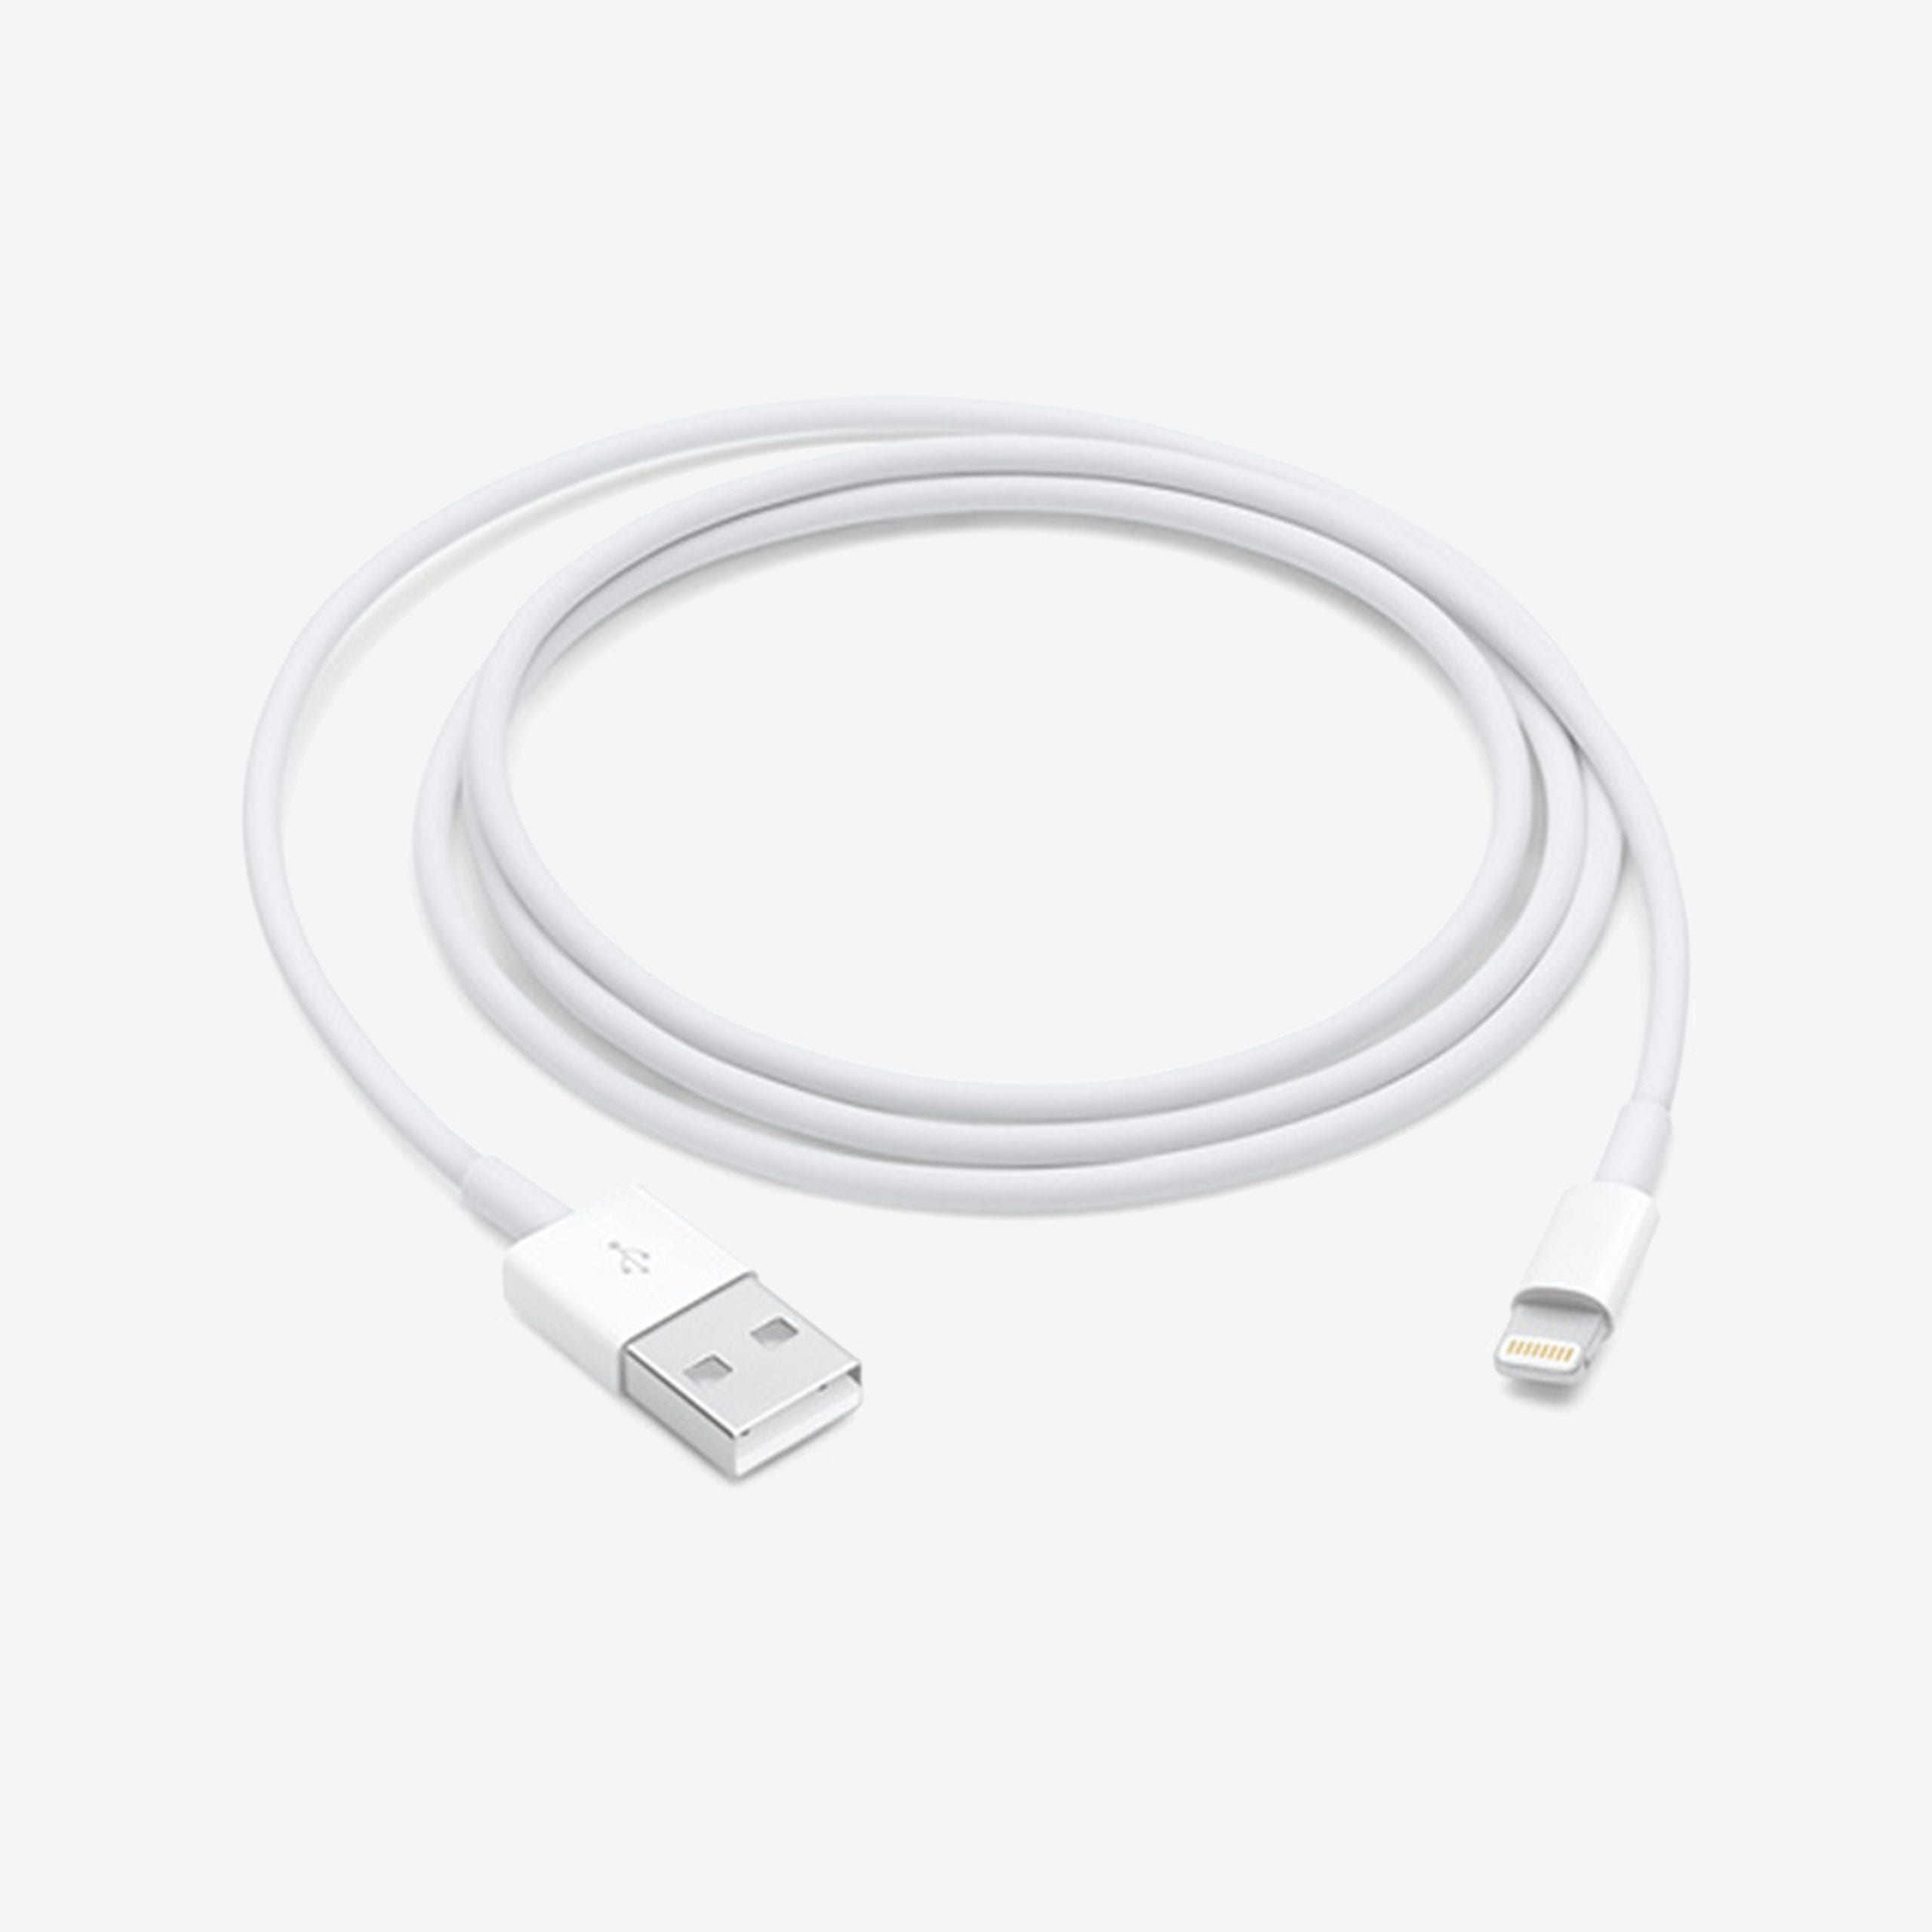 1 x 1x Lightning Cable